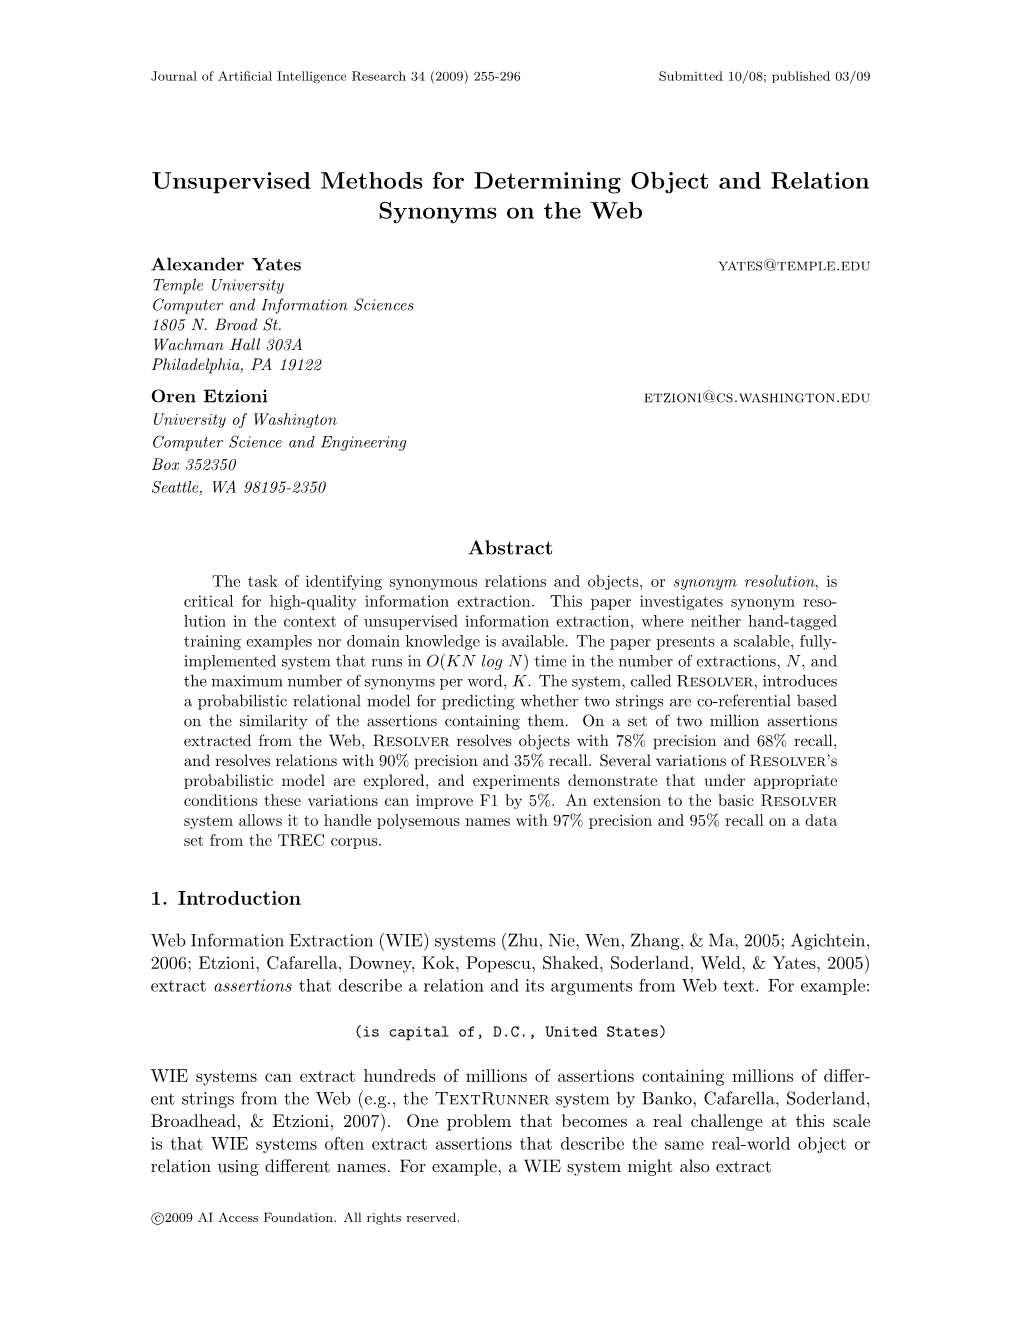 Unsupervised Methods for Determining Object and Relation Synonyms on the Web